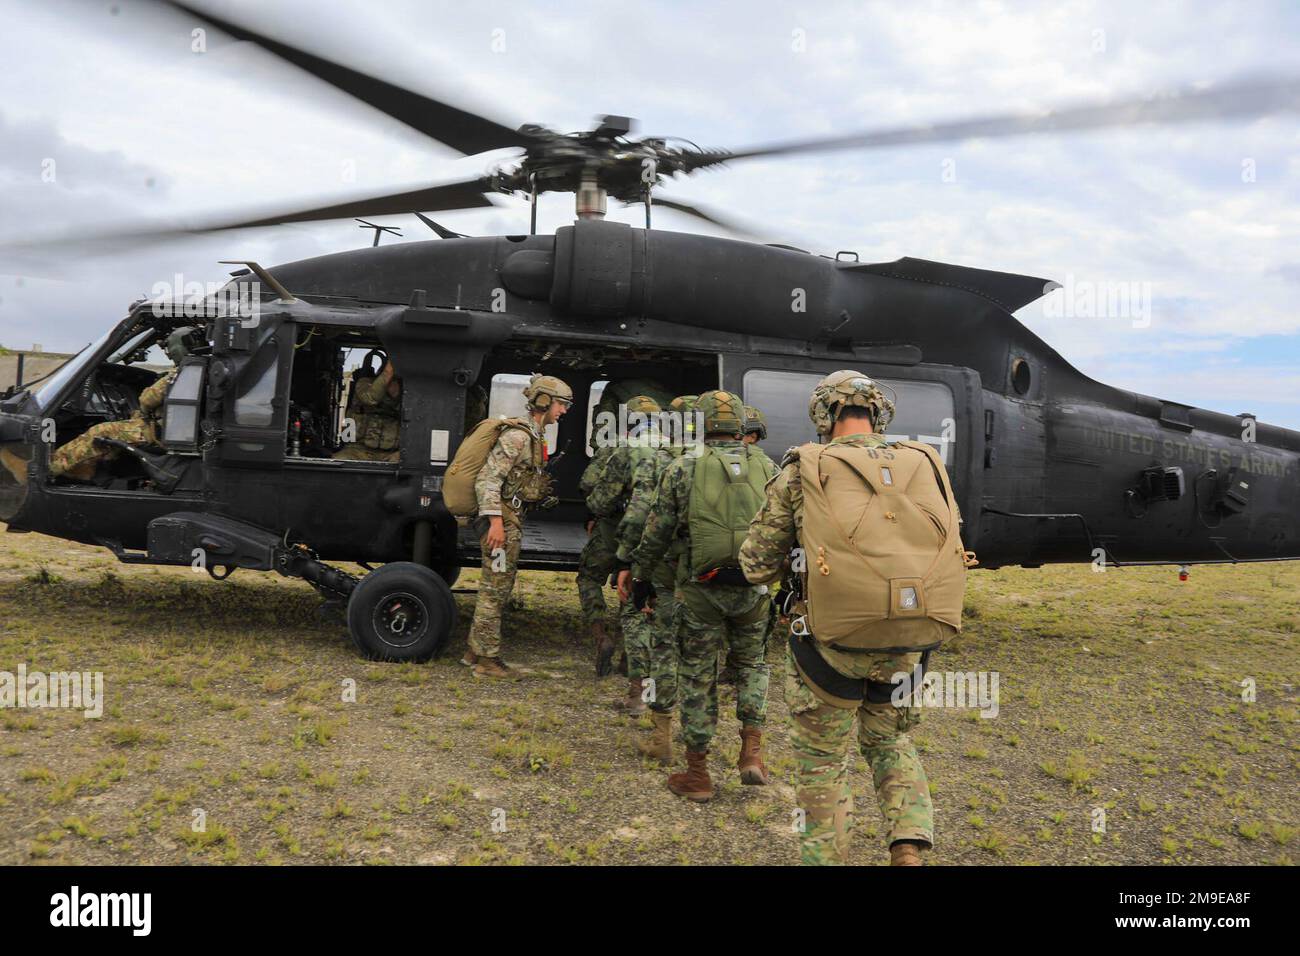 Members of the 7th Special Forces Group (Airborne) along with their Ecuadorian Special Forces partners load onto a MH-60 Blackhawk to conduct high altitude, low opening (HALO) jump in Manta, Ecuador, May 19, 2022. Ecuadorian military and US forces are conducting routine military exchanges from May 6-27 between the cities of Manta and Latacunga. Bilateral exchanges allow both militaries to strengthen tactical readiness for future operations maintain readiness and support continue commitment in responding to emerging security crises and natural disasters.    ( U.S. Army photos by Staff Sgt. Matt Stock Photo